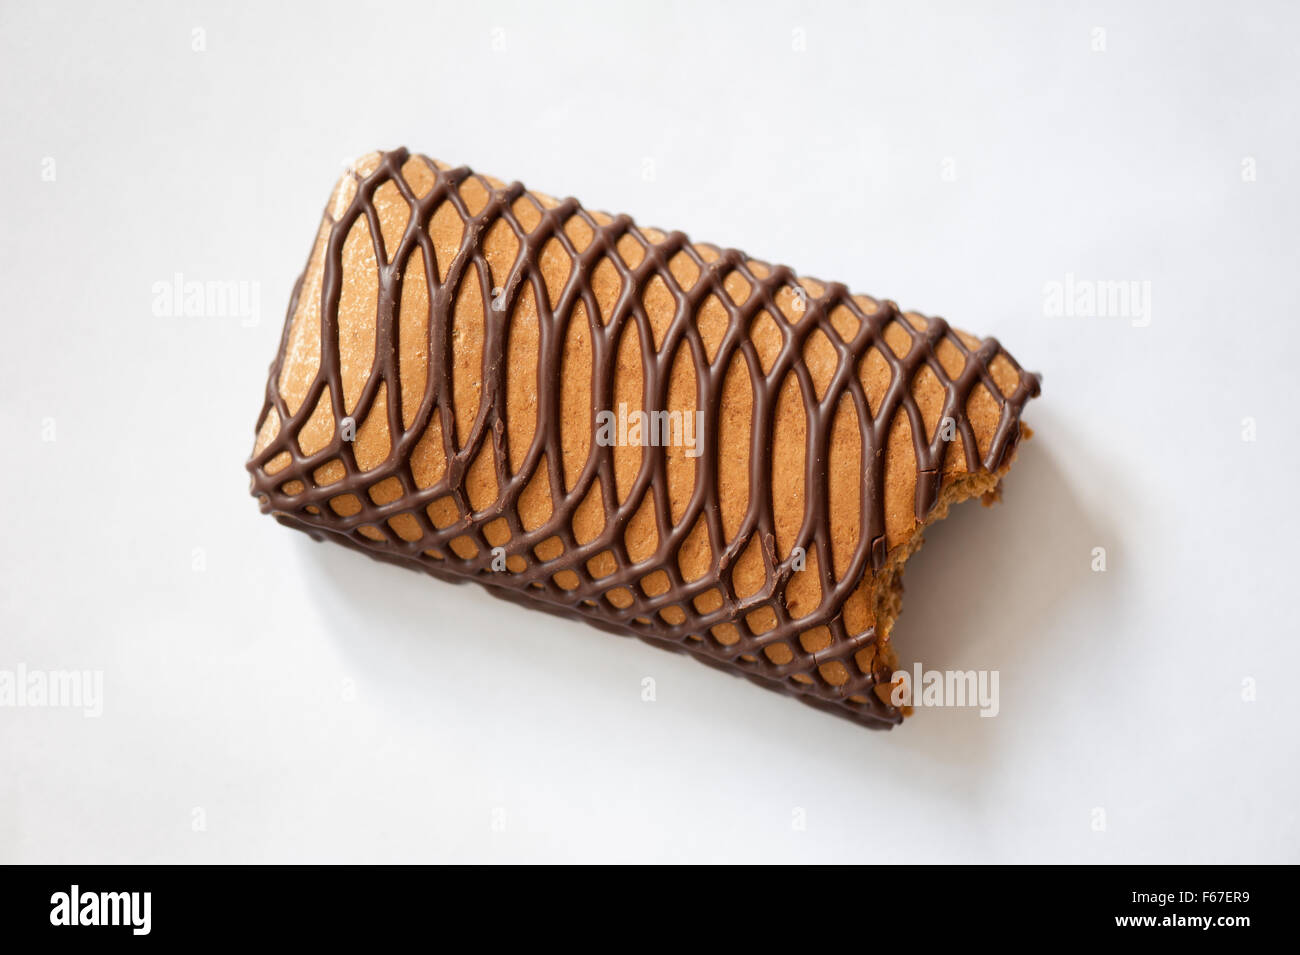 Bitten gingerbread sweet bar snack decorated with chocolate, candy sweets with decorative pattern milk chocolate icing ... Stock Photo